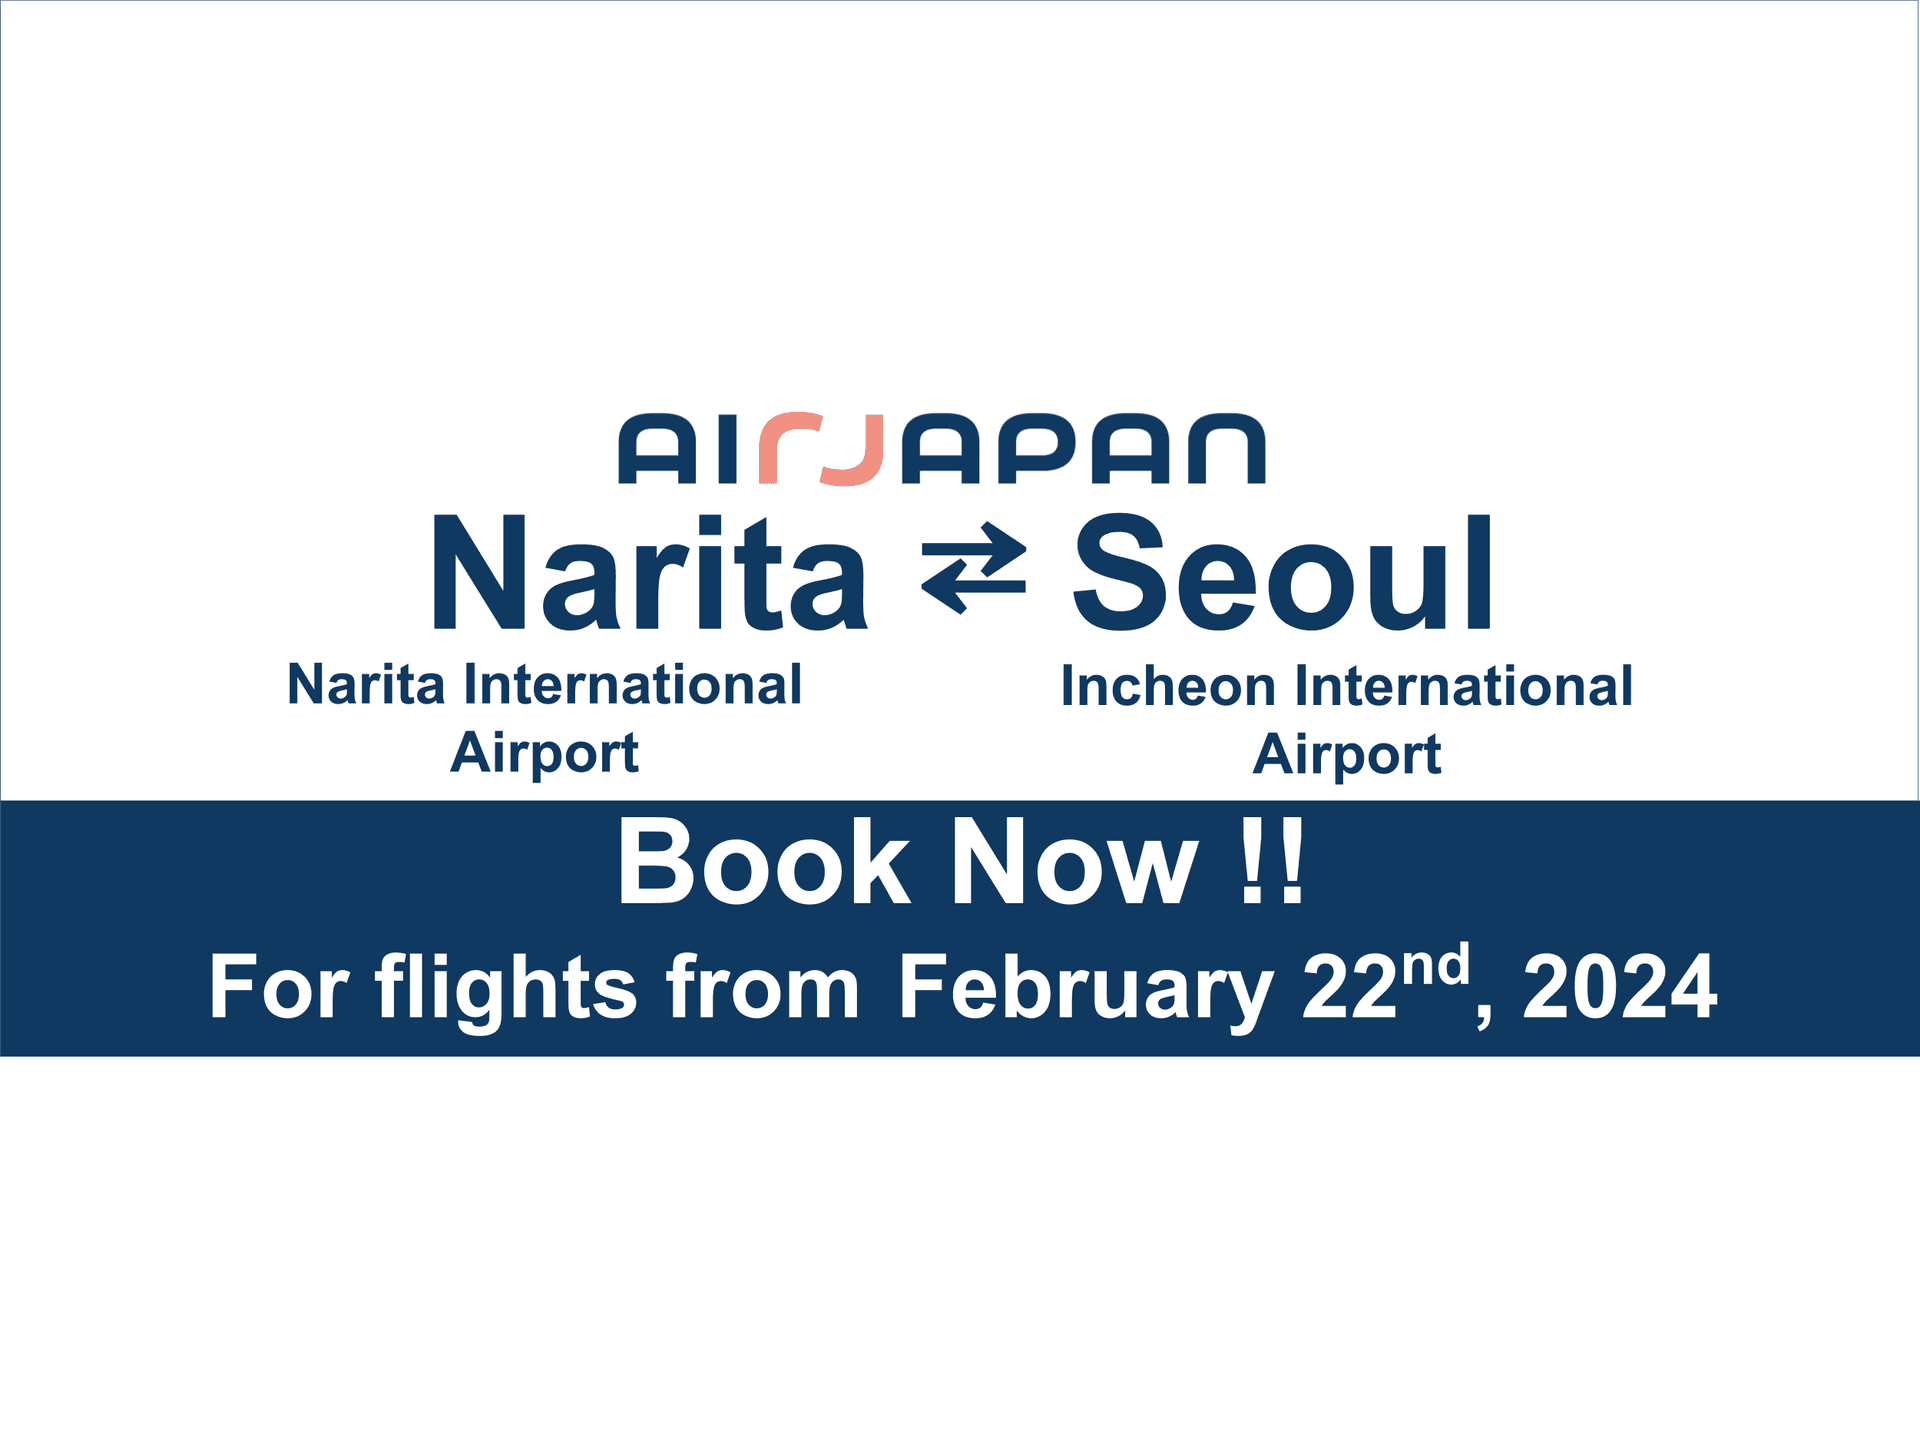 NRT-ICN route will begin on Thu, February 22nd, 2024